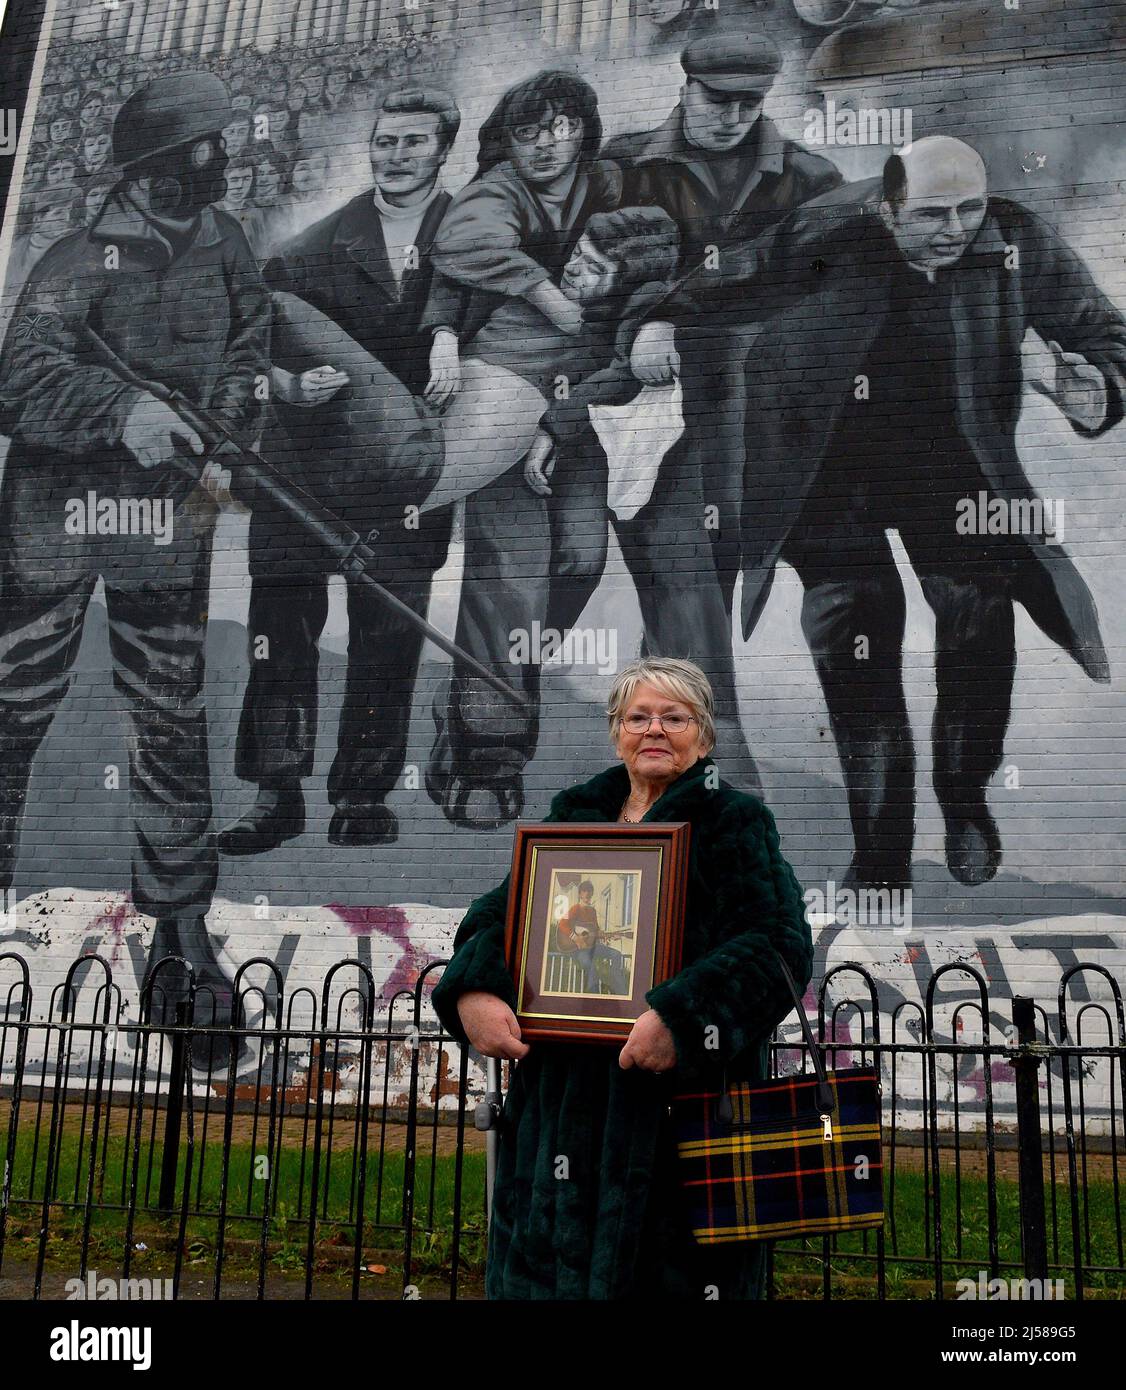 Kate Nash, at the Bloody Sunday Mural in the Bogside, whose brother William was killed and whose father Alex was seriously injured, by British Paratroopers, on Bloody Sunday1972 in Derry, Northern Ireland, ©George Sweeney / Alamy Stock Photo Stock Photo